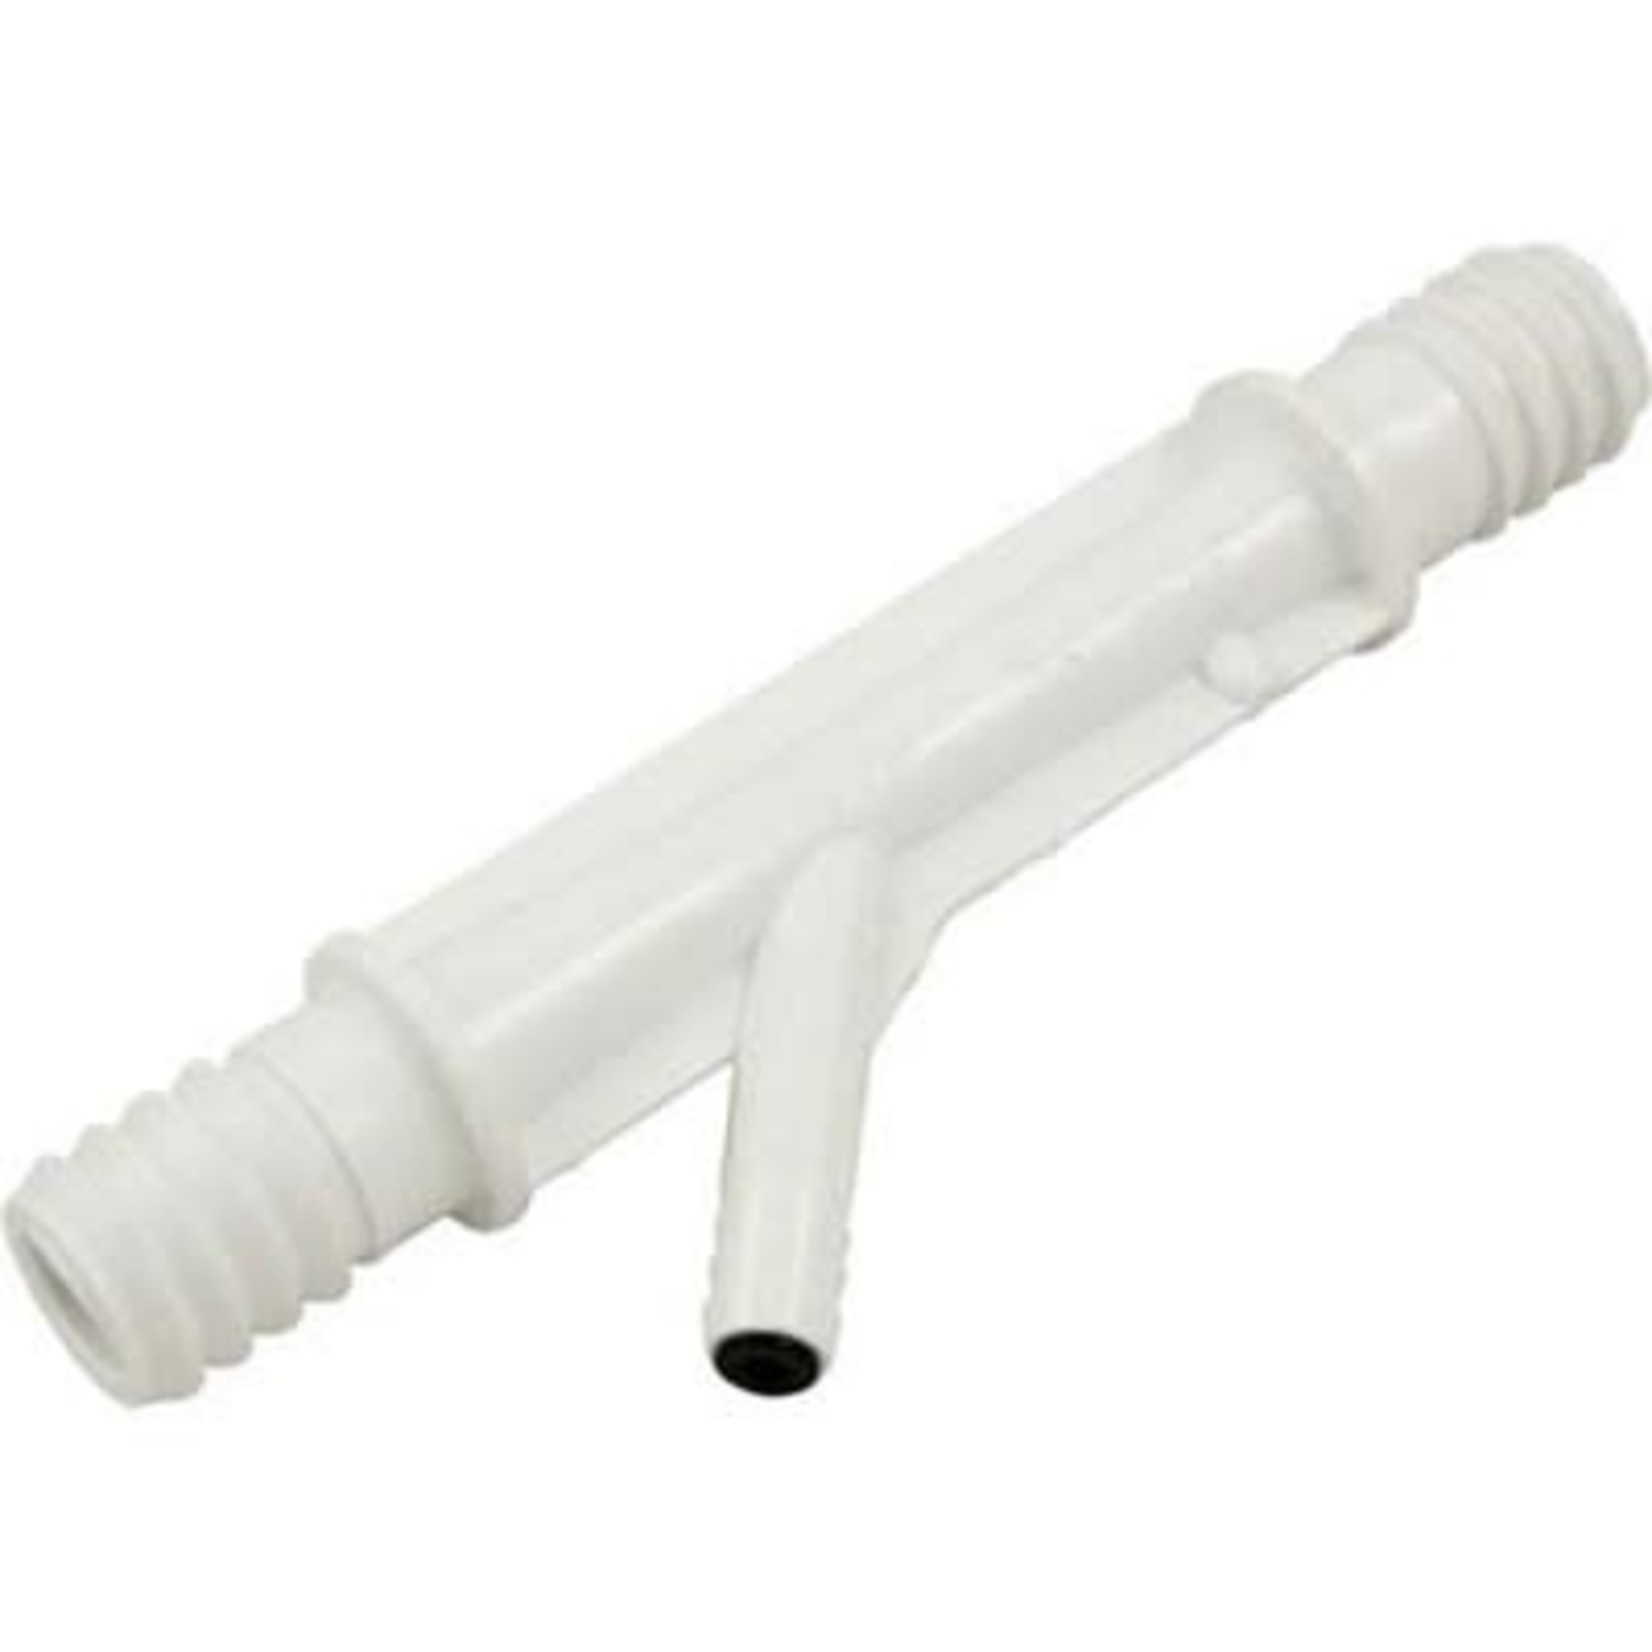 Tube Barb Connect PROZONE  V3 Injector Pz884-3-4in